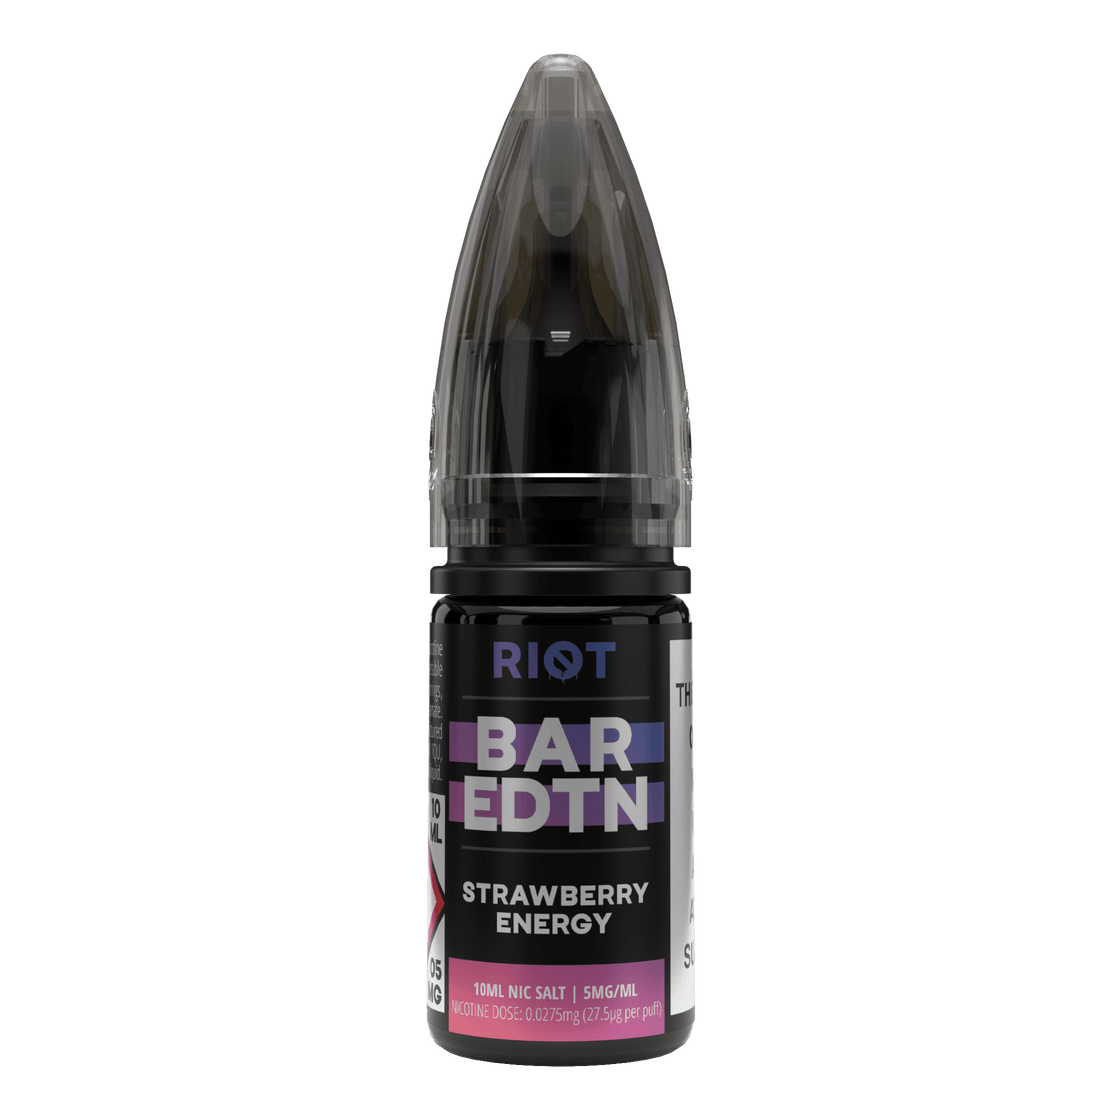 BAR EDTN - SWEET AS F**K - 5MG | 10MG | 20MG BY RIOT SQUAD - Vapeslough